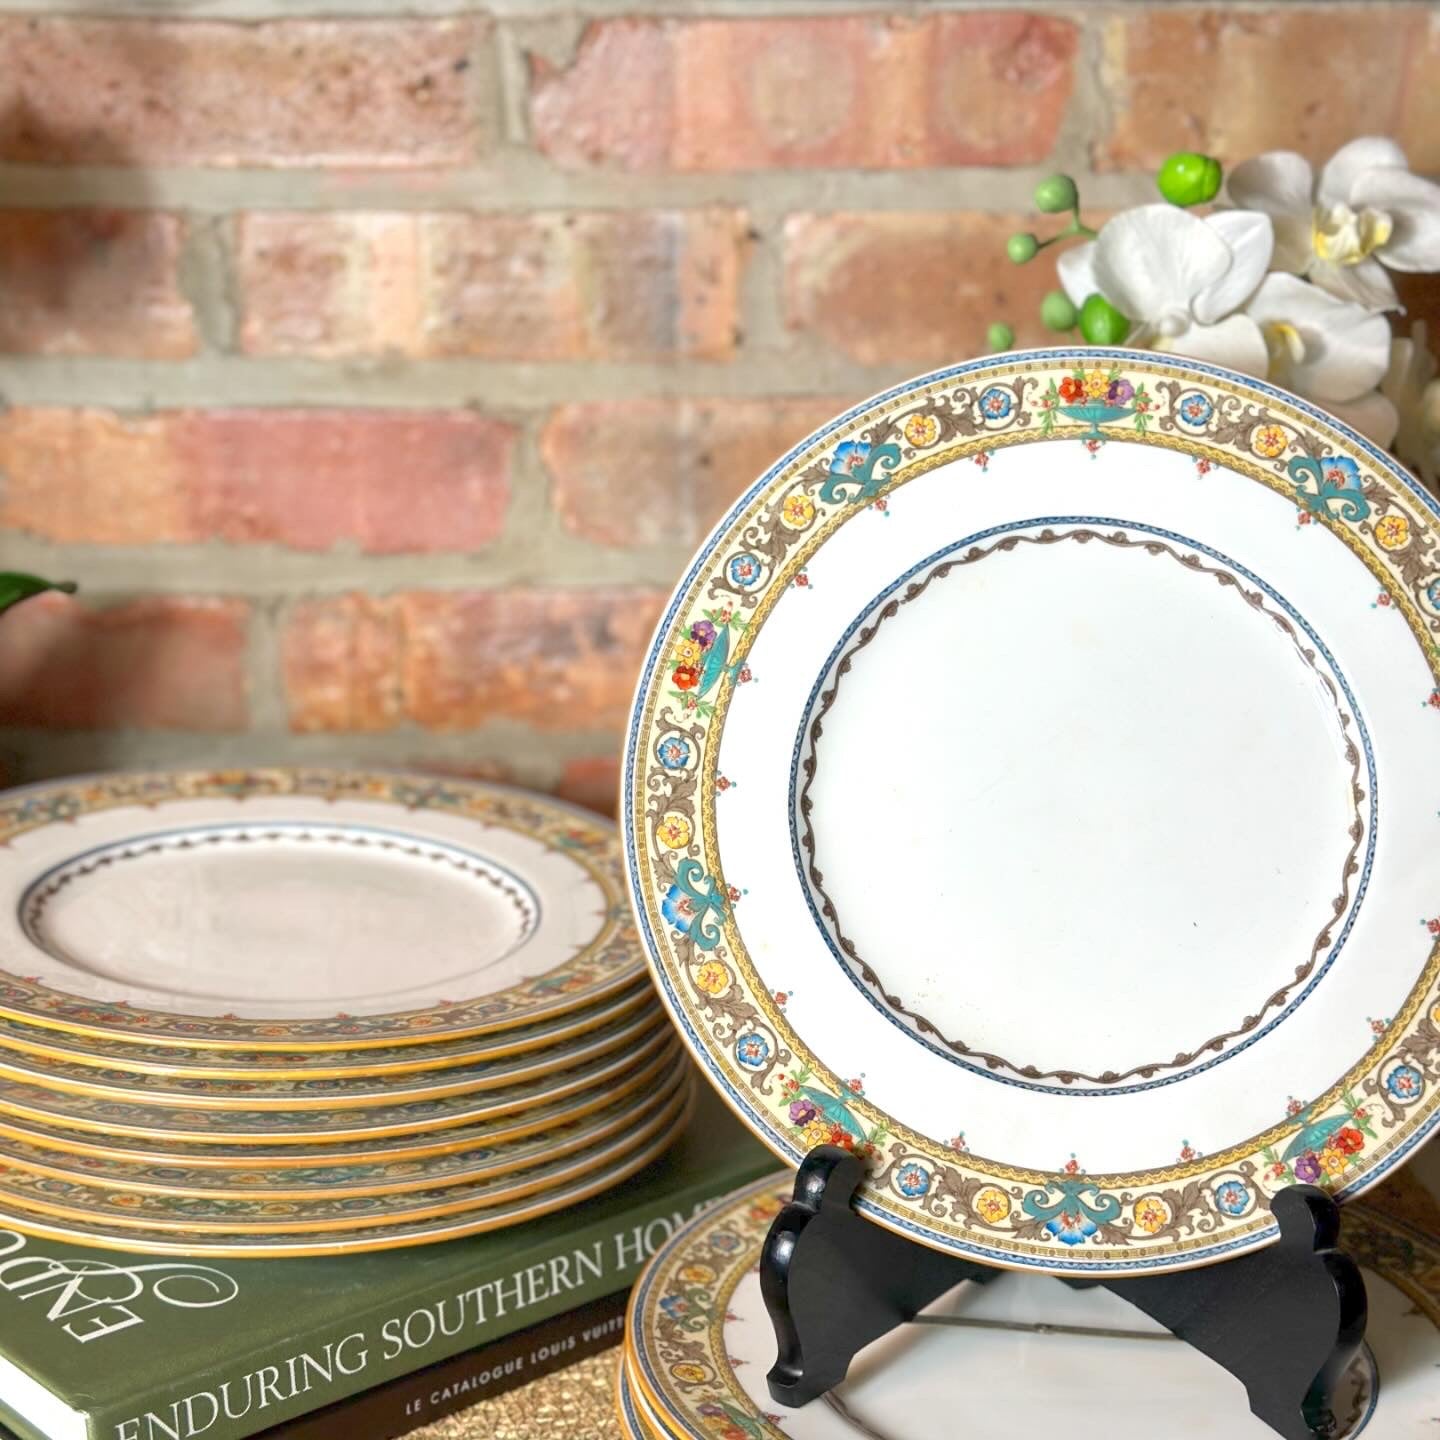 Antique set of (12) dinner plates by Minton in “Plymouth” - Pristine!